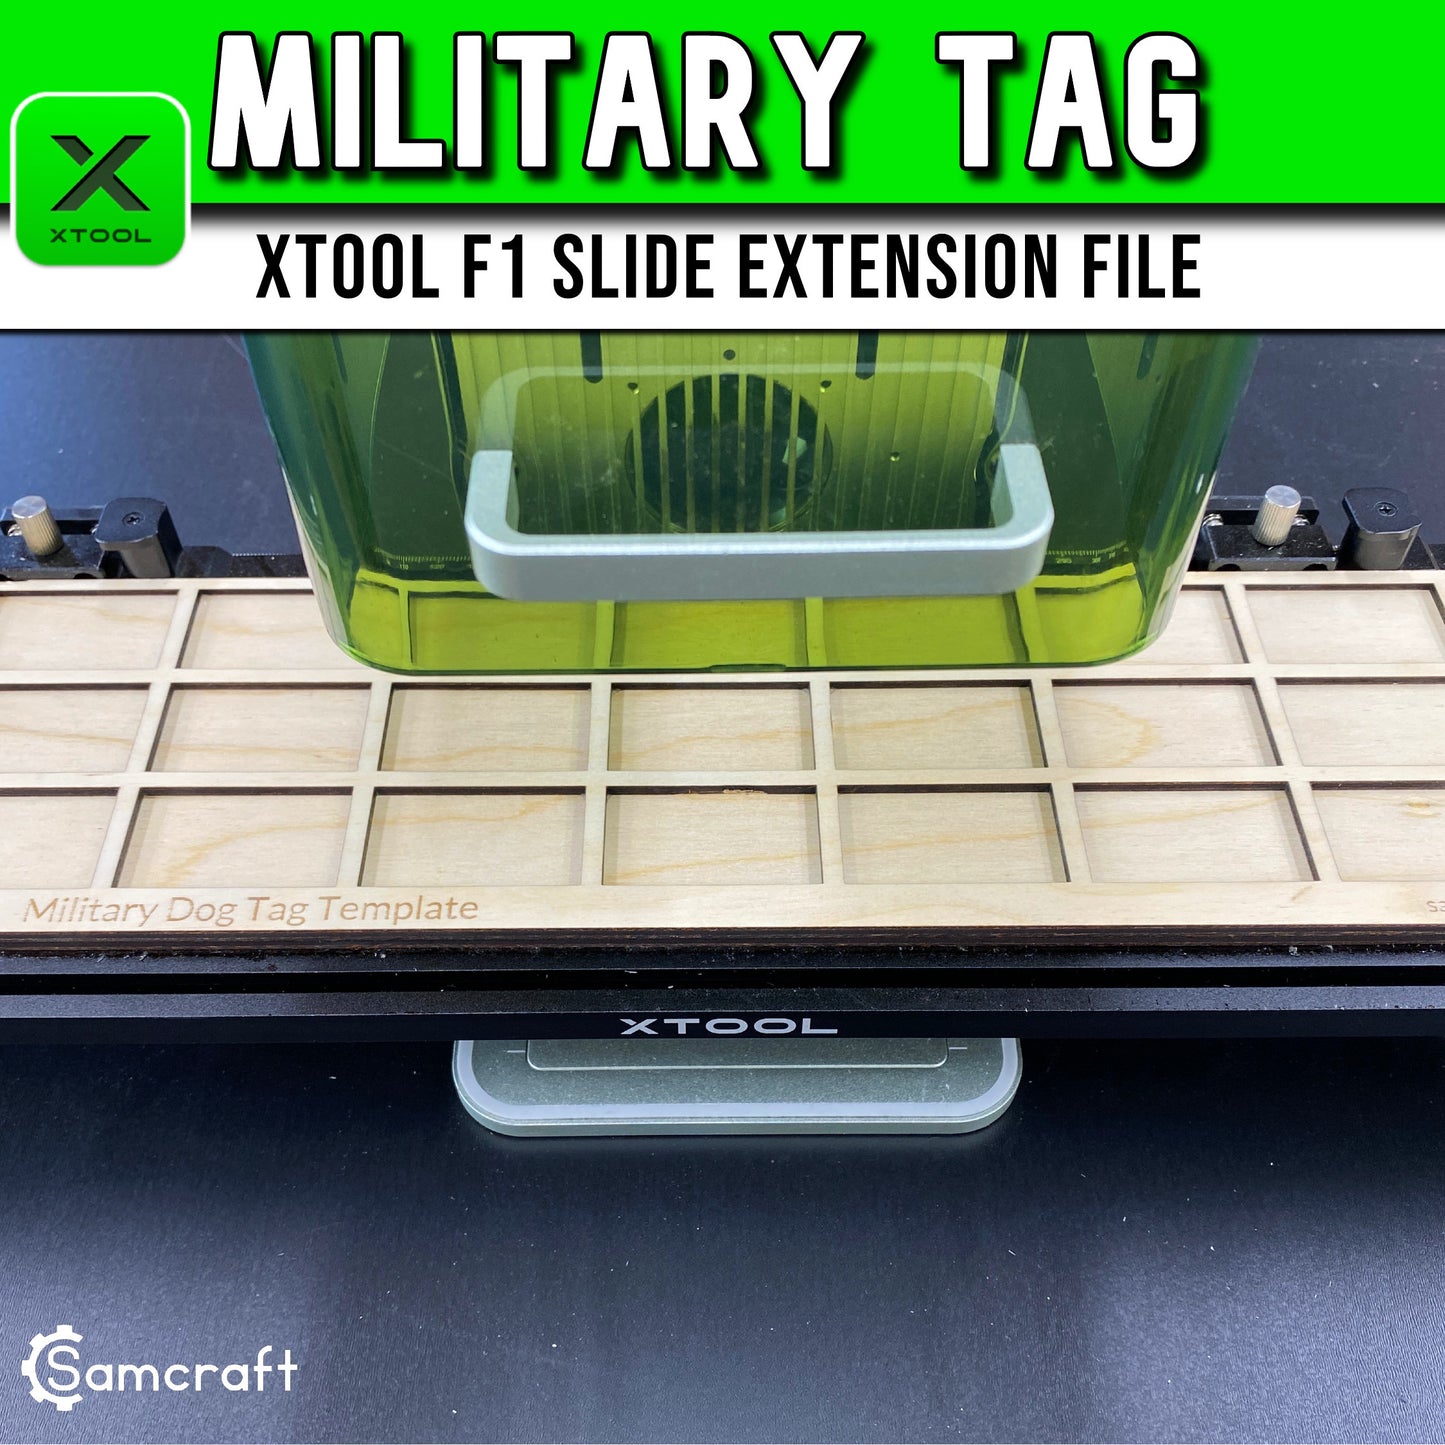 Military Dog Tag Template - xTool F1 Slide Extension